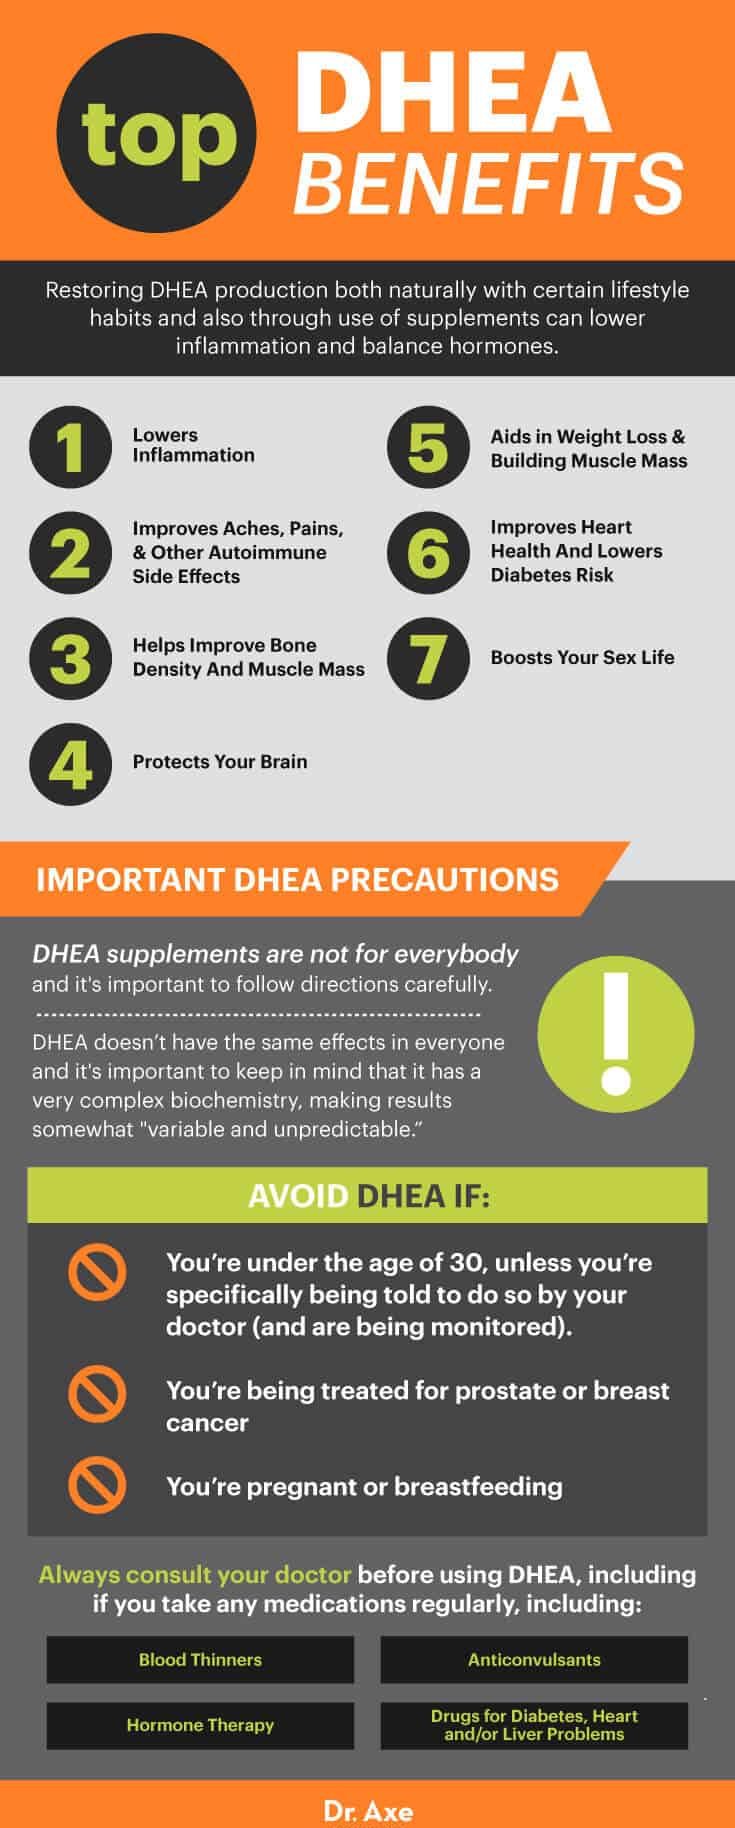 The Benefits and Risks of DHEA Supplements